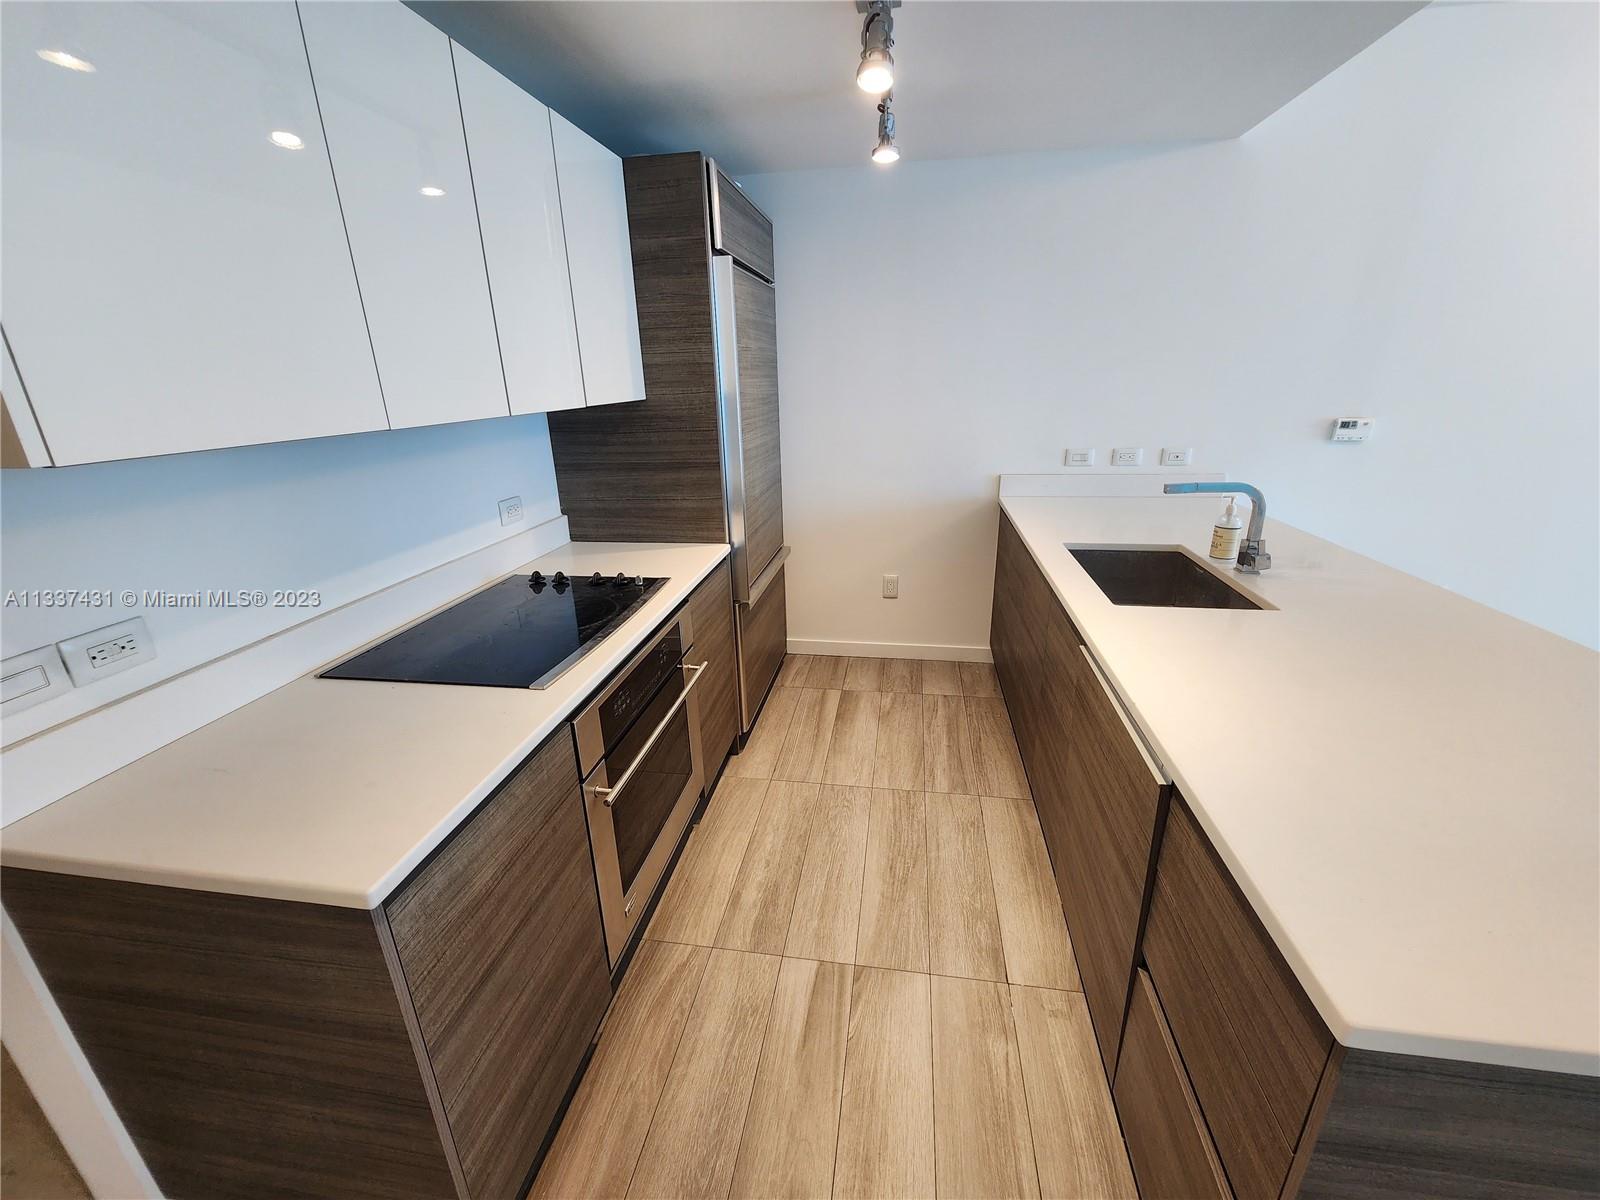 SPECTACULAR 2 BED 2 BATH RESIDENCE AT MILLECENTO IN THE HEART OF BRICKELL. FEATURING TOP OF THE LLINE APPLIANCES, NICE FLOORS, AND GREAT VIEWS! BUILDING WIHT FULL AMENITIES! WONT LAST!